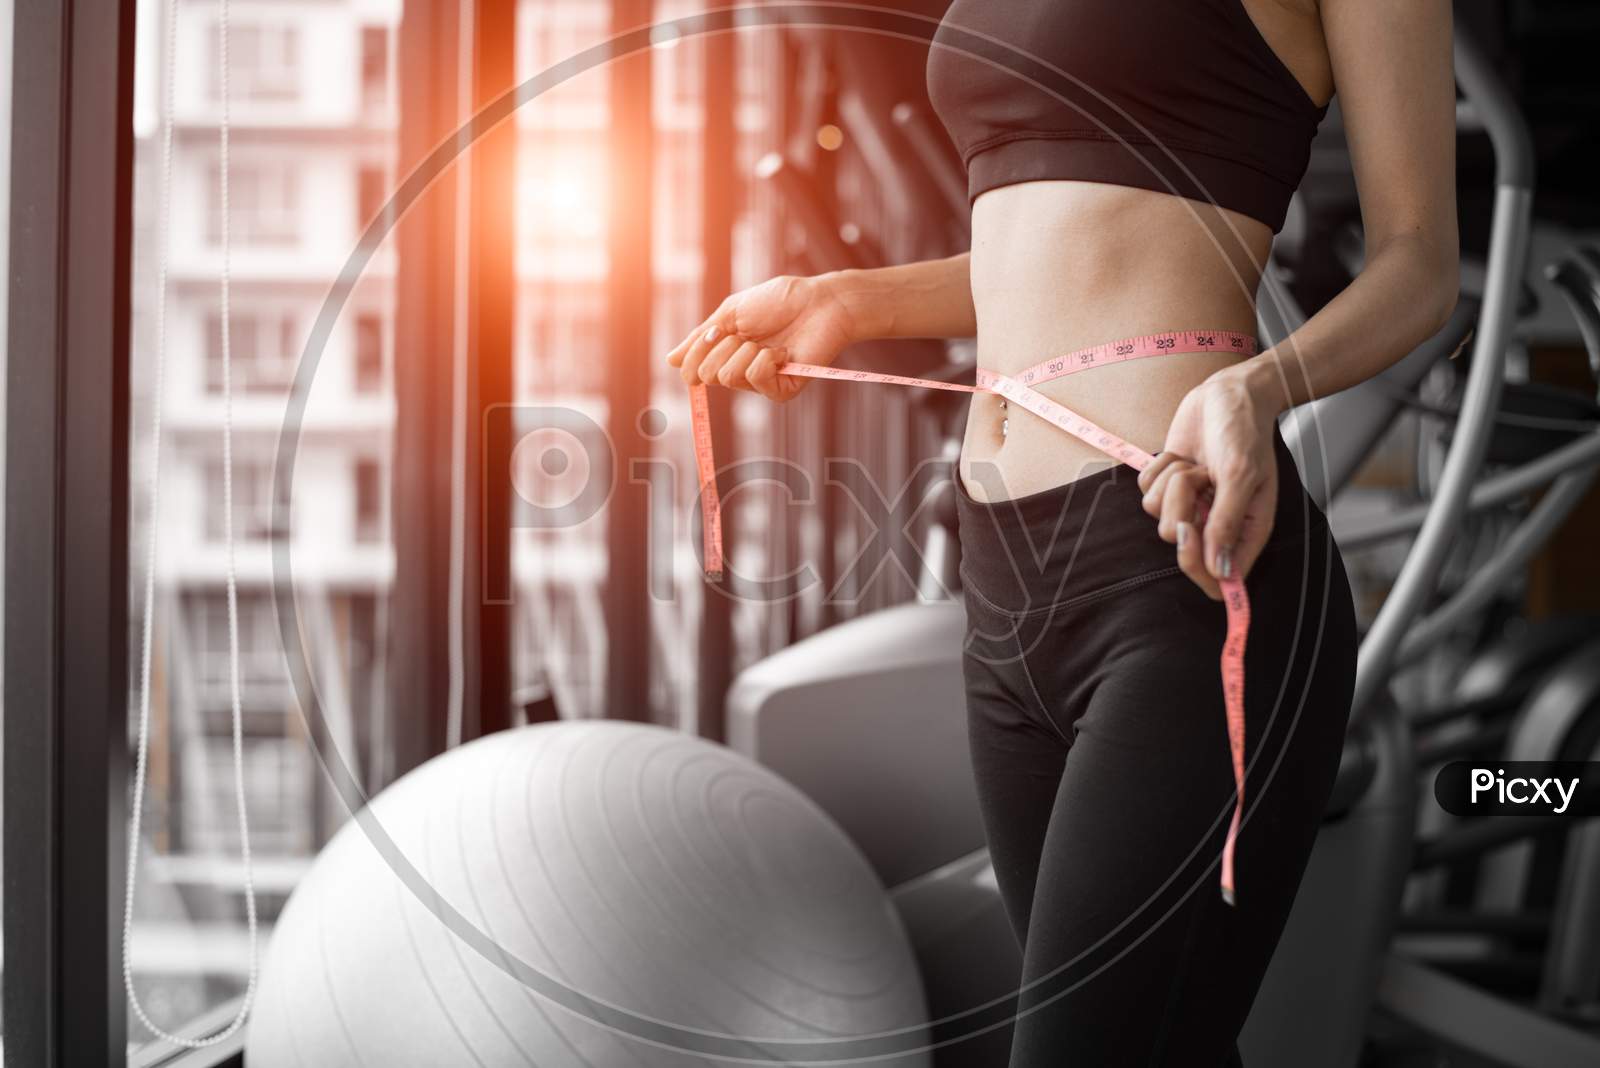 Sporty Woman Using Waist Tape Line In Fitness Gym Sport Club Training Center Near Window With Condominium Background. Lifestyle Of People Workout Exercise Sport Activity. Diet And Weight Loss Theme.